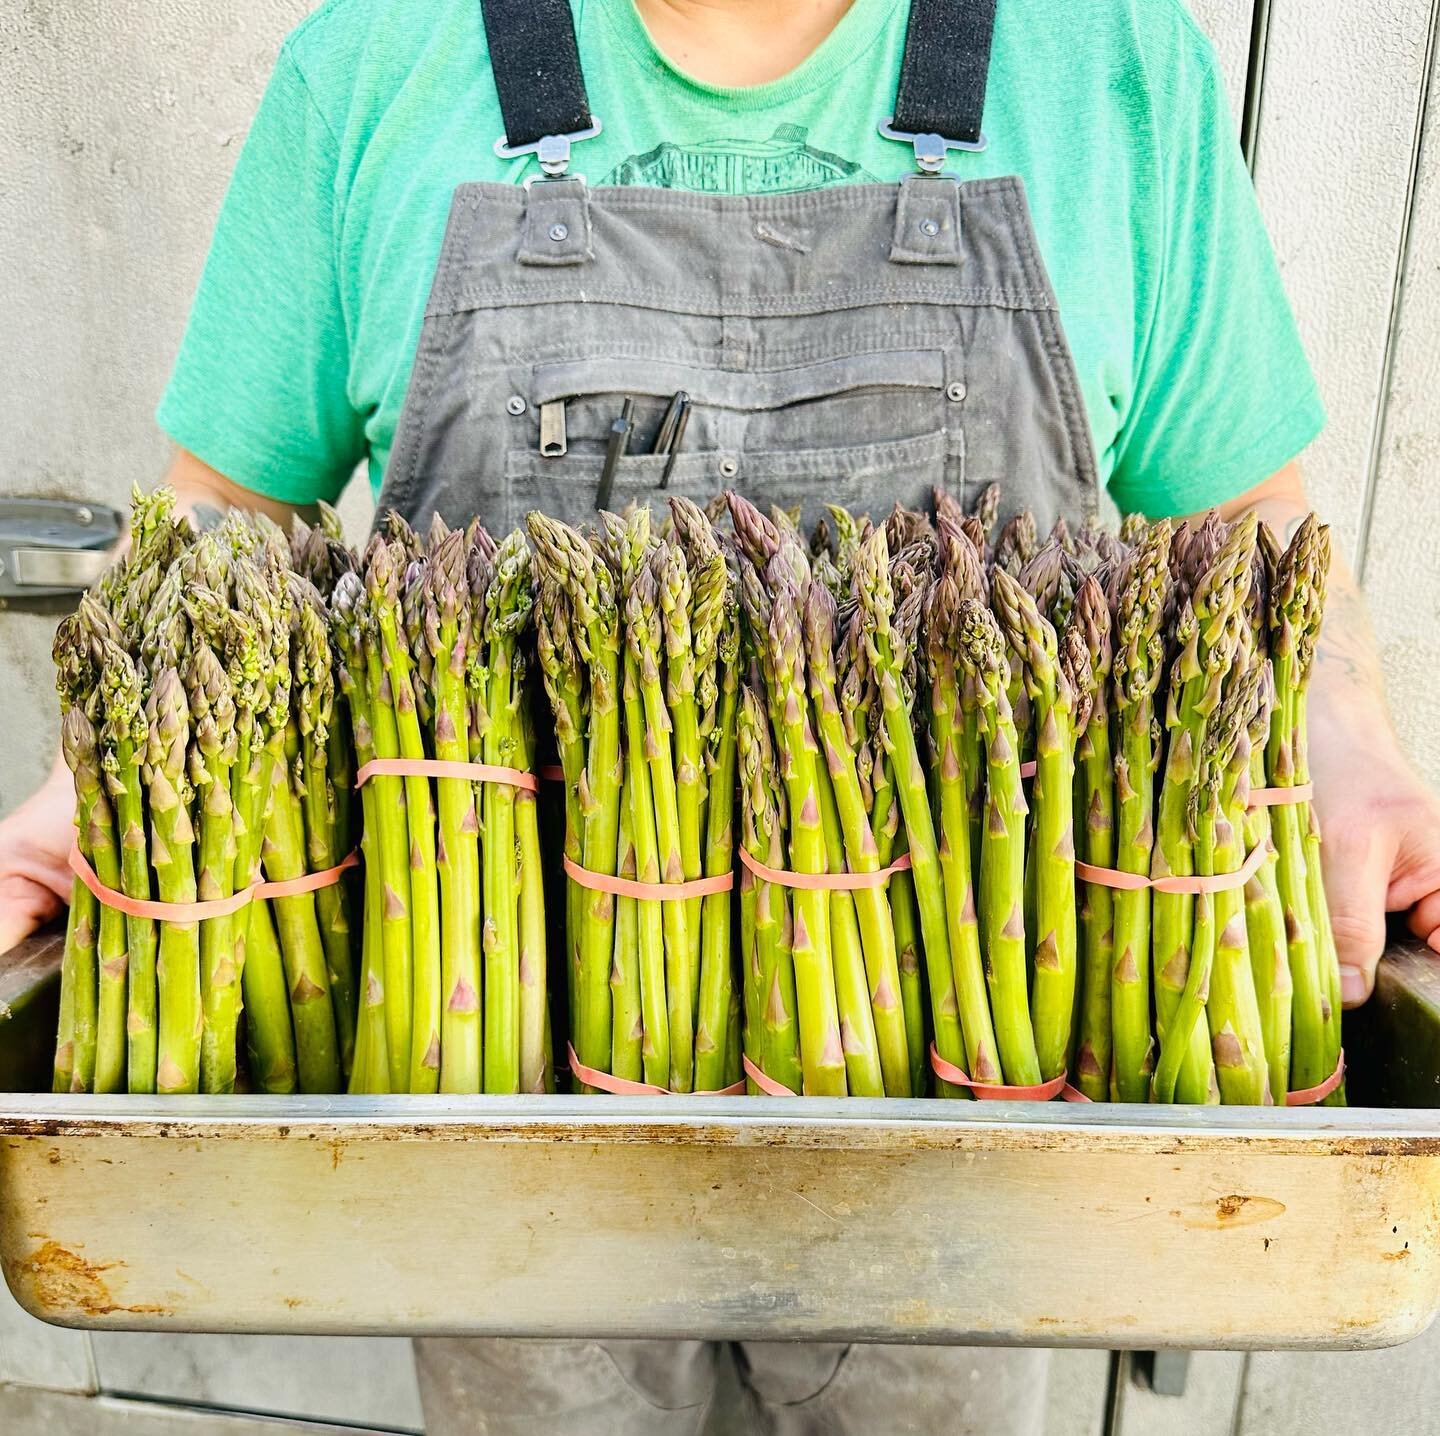 Starting today you can add NJ asparagus to your mushroom grilled cheese thanks to Flaim Farms!!!

You&rsquo;ll be seeing this beautiful asparagus pop up in your breakfast salad and in other menu items real soon! 

#springhassprung #asparagus #mariasb